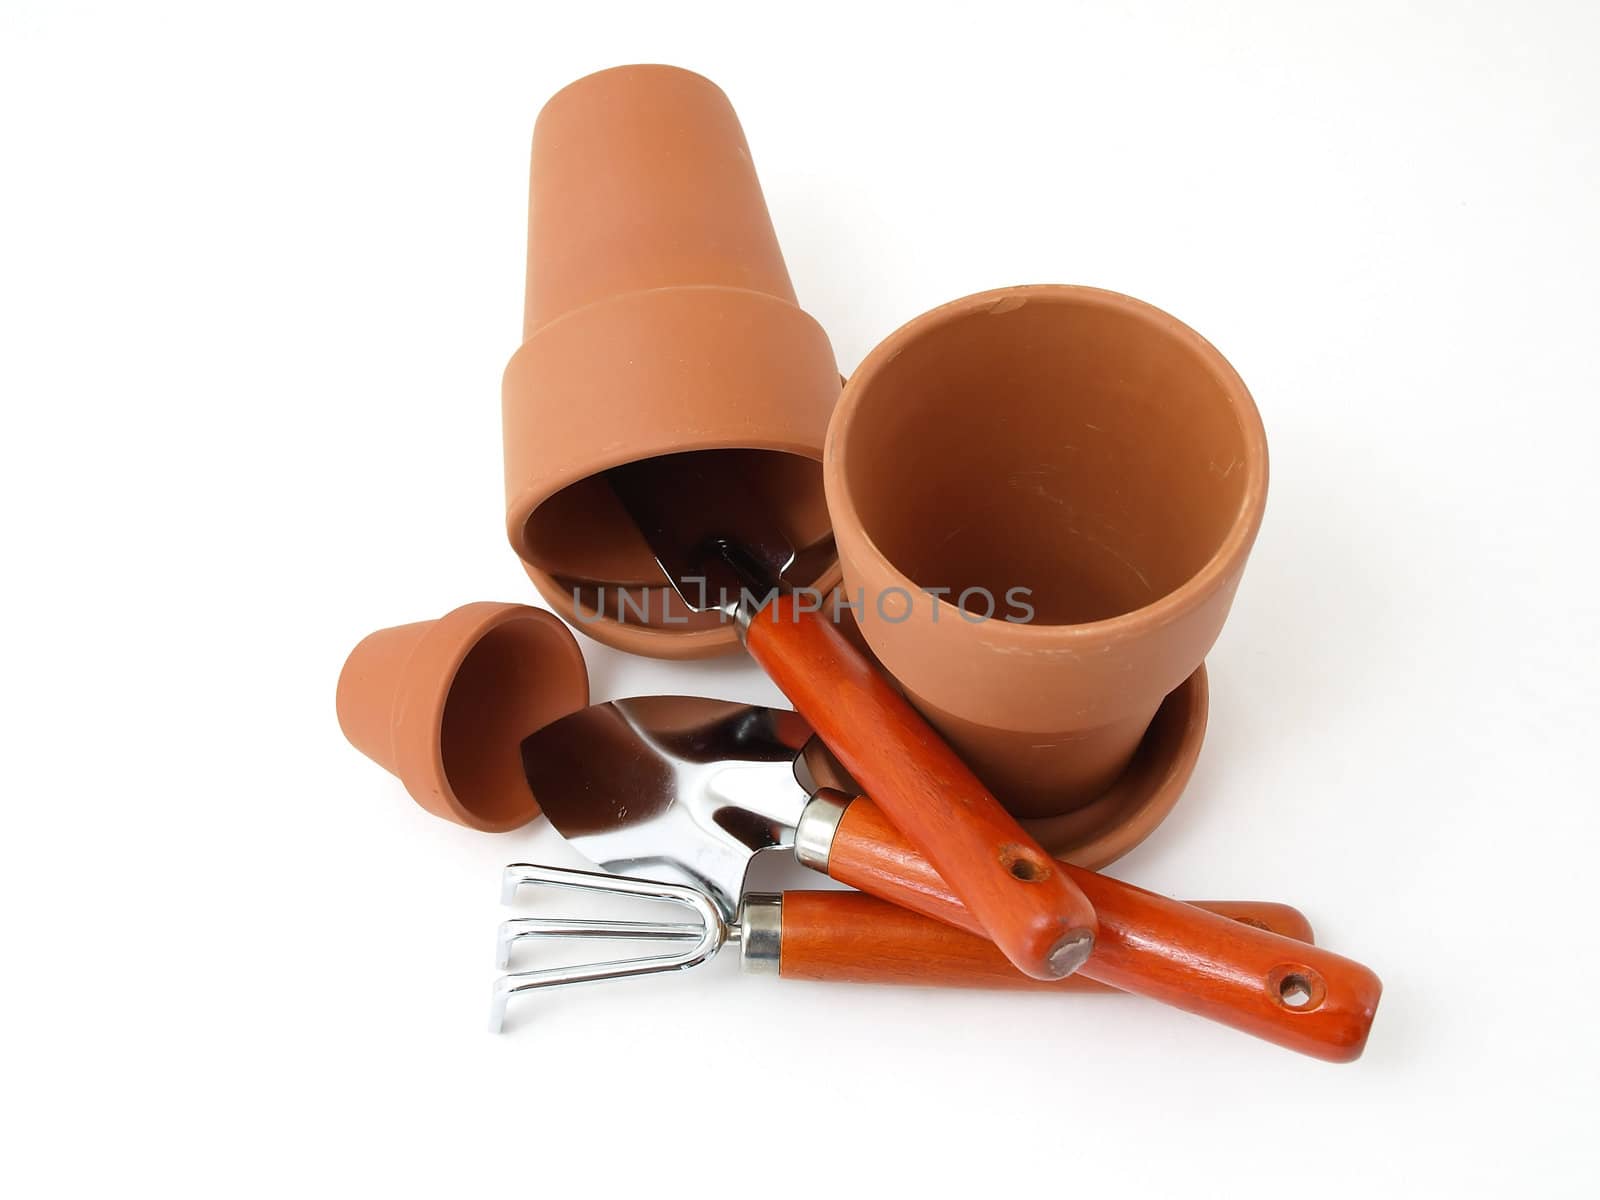 Several different sized terra cotta clay pots and gardening tools isolated on a white background.